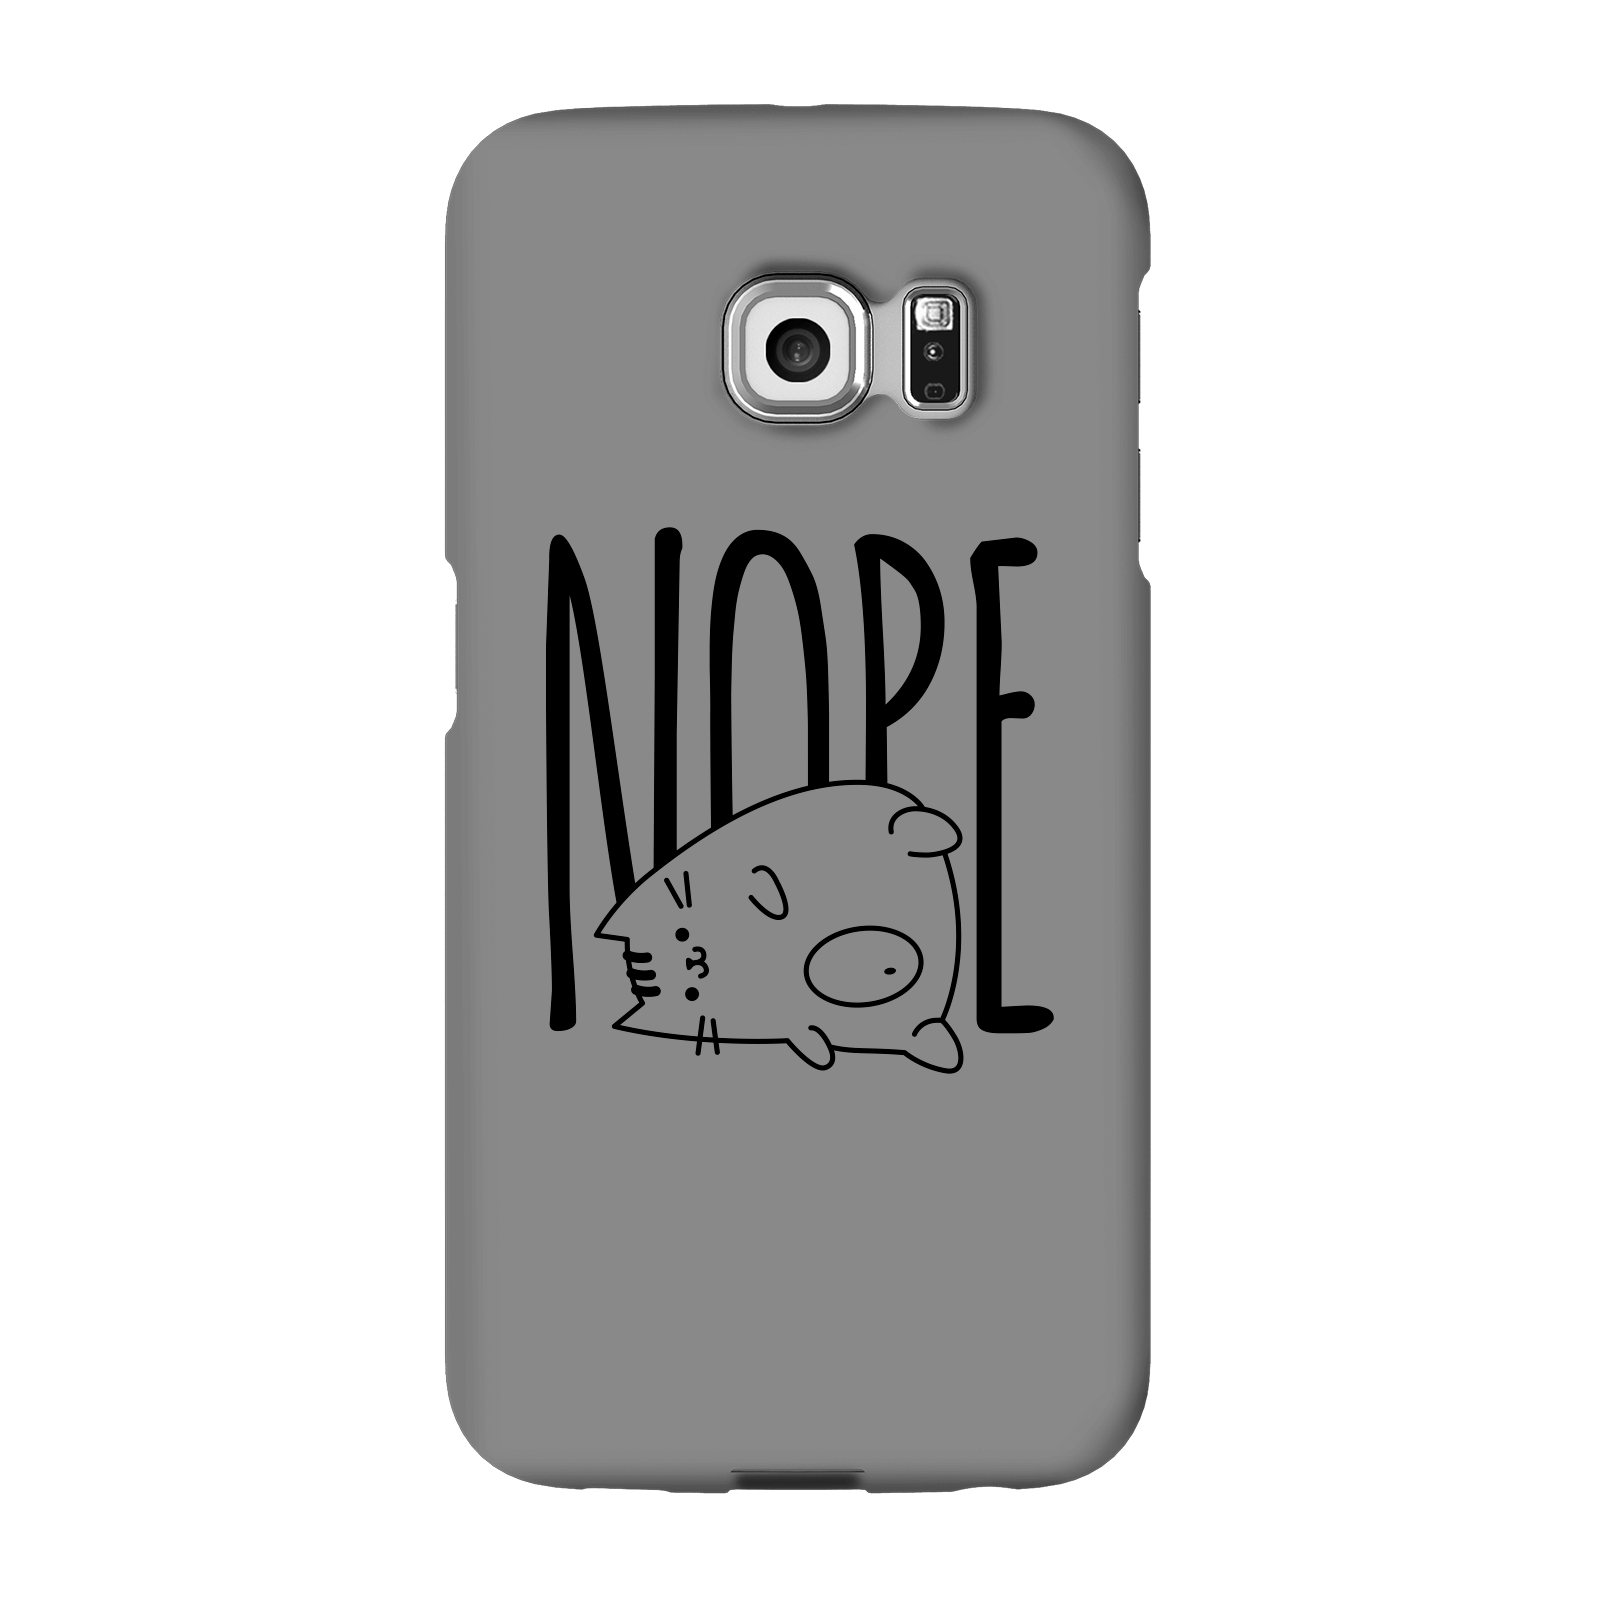 Nope Phone Case for iPhone and Android - Samsung S6 Edge Plus - Snap Case - Matte